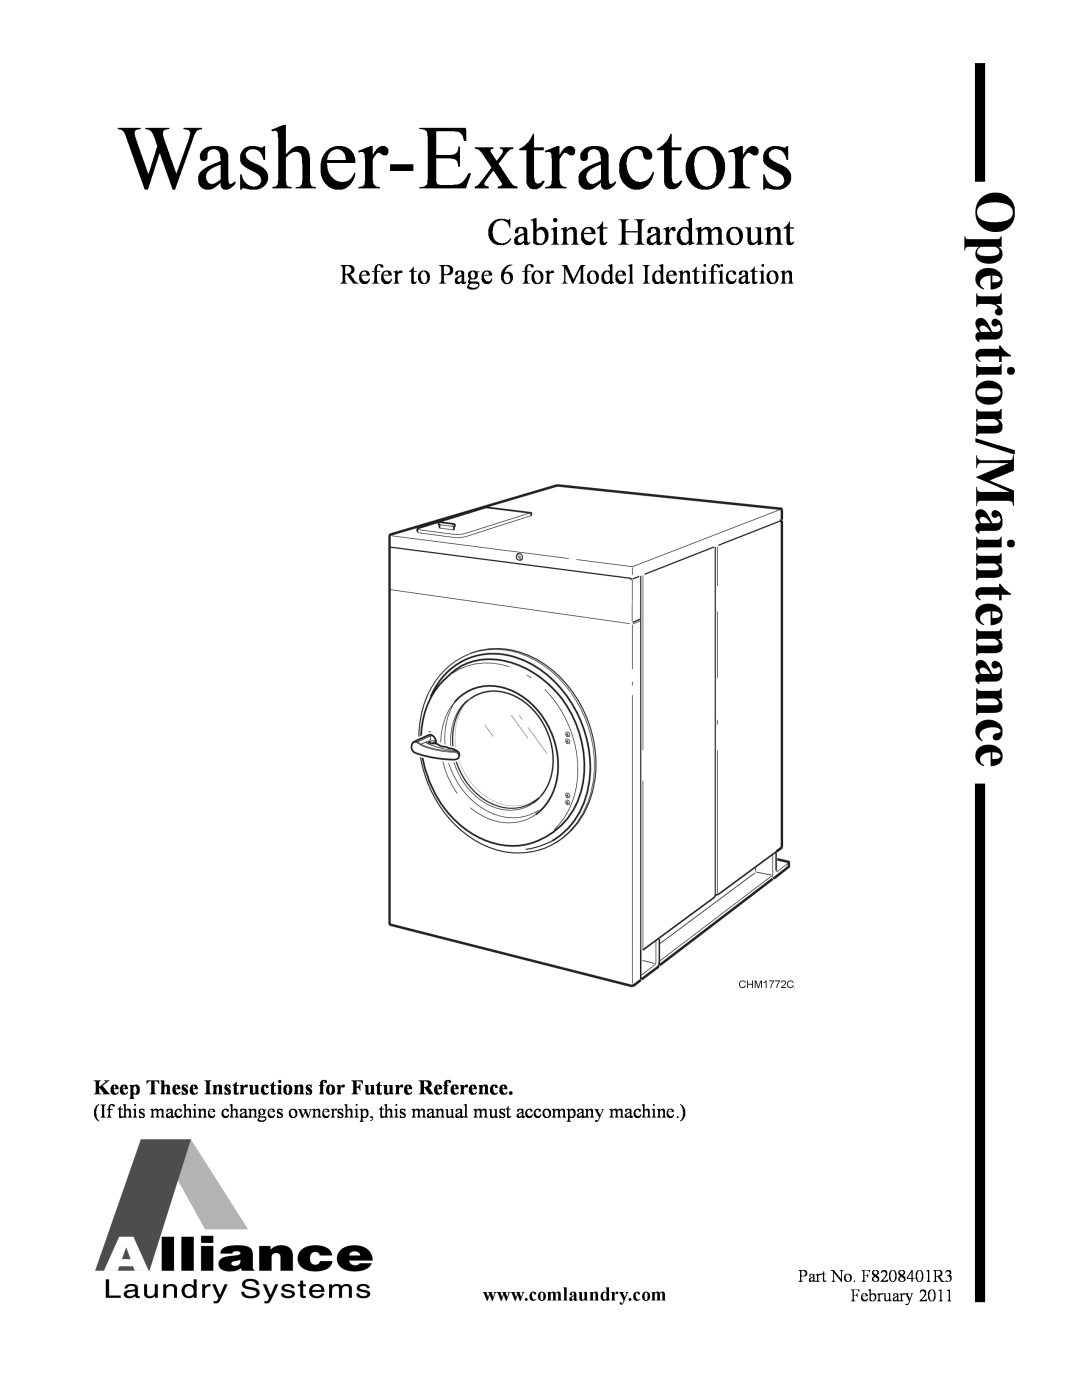 Alliance Laundry Systems CHM1772C manual Washer-Extractors, Cabinet Hardmount, Refer to Page 6 for Model Identification 